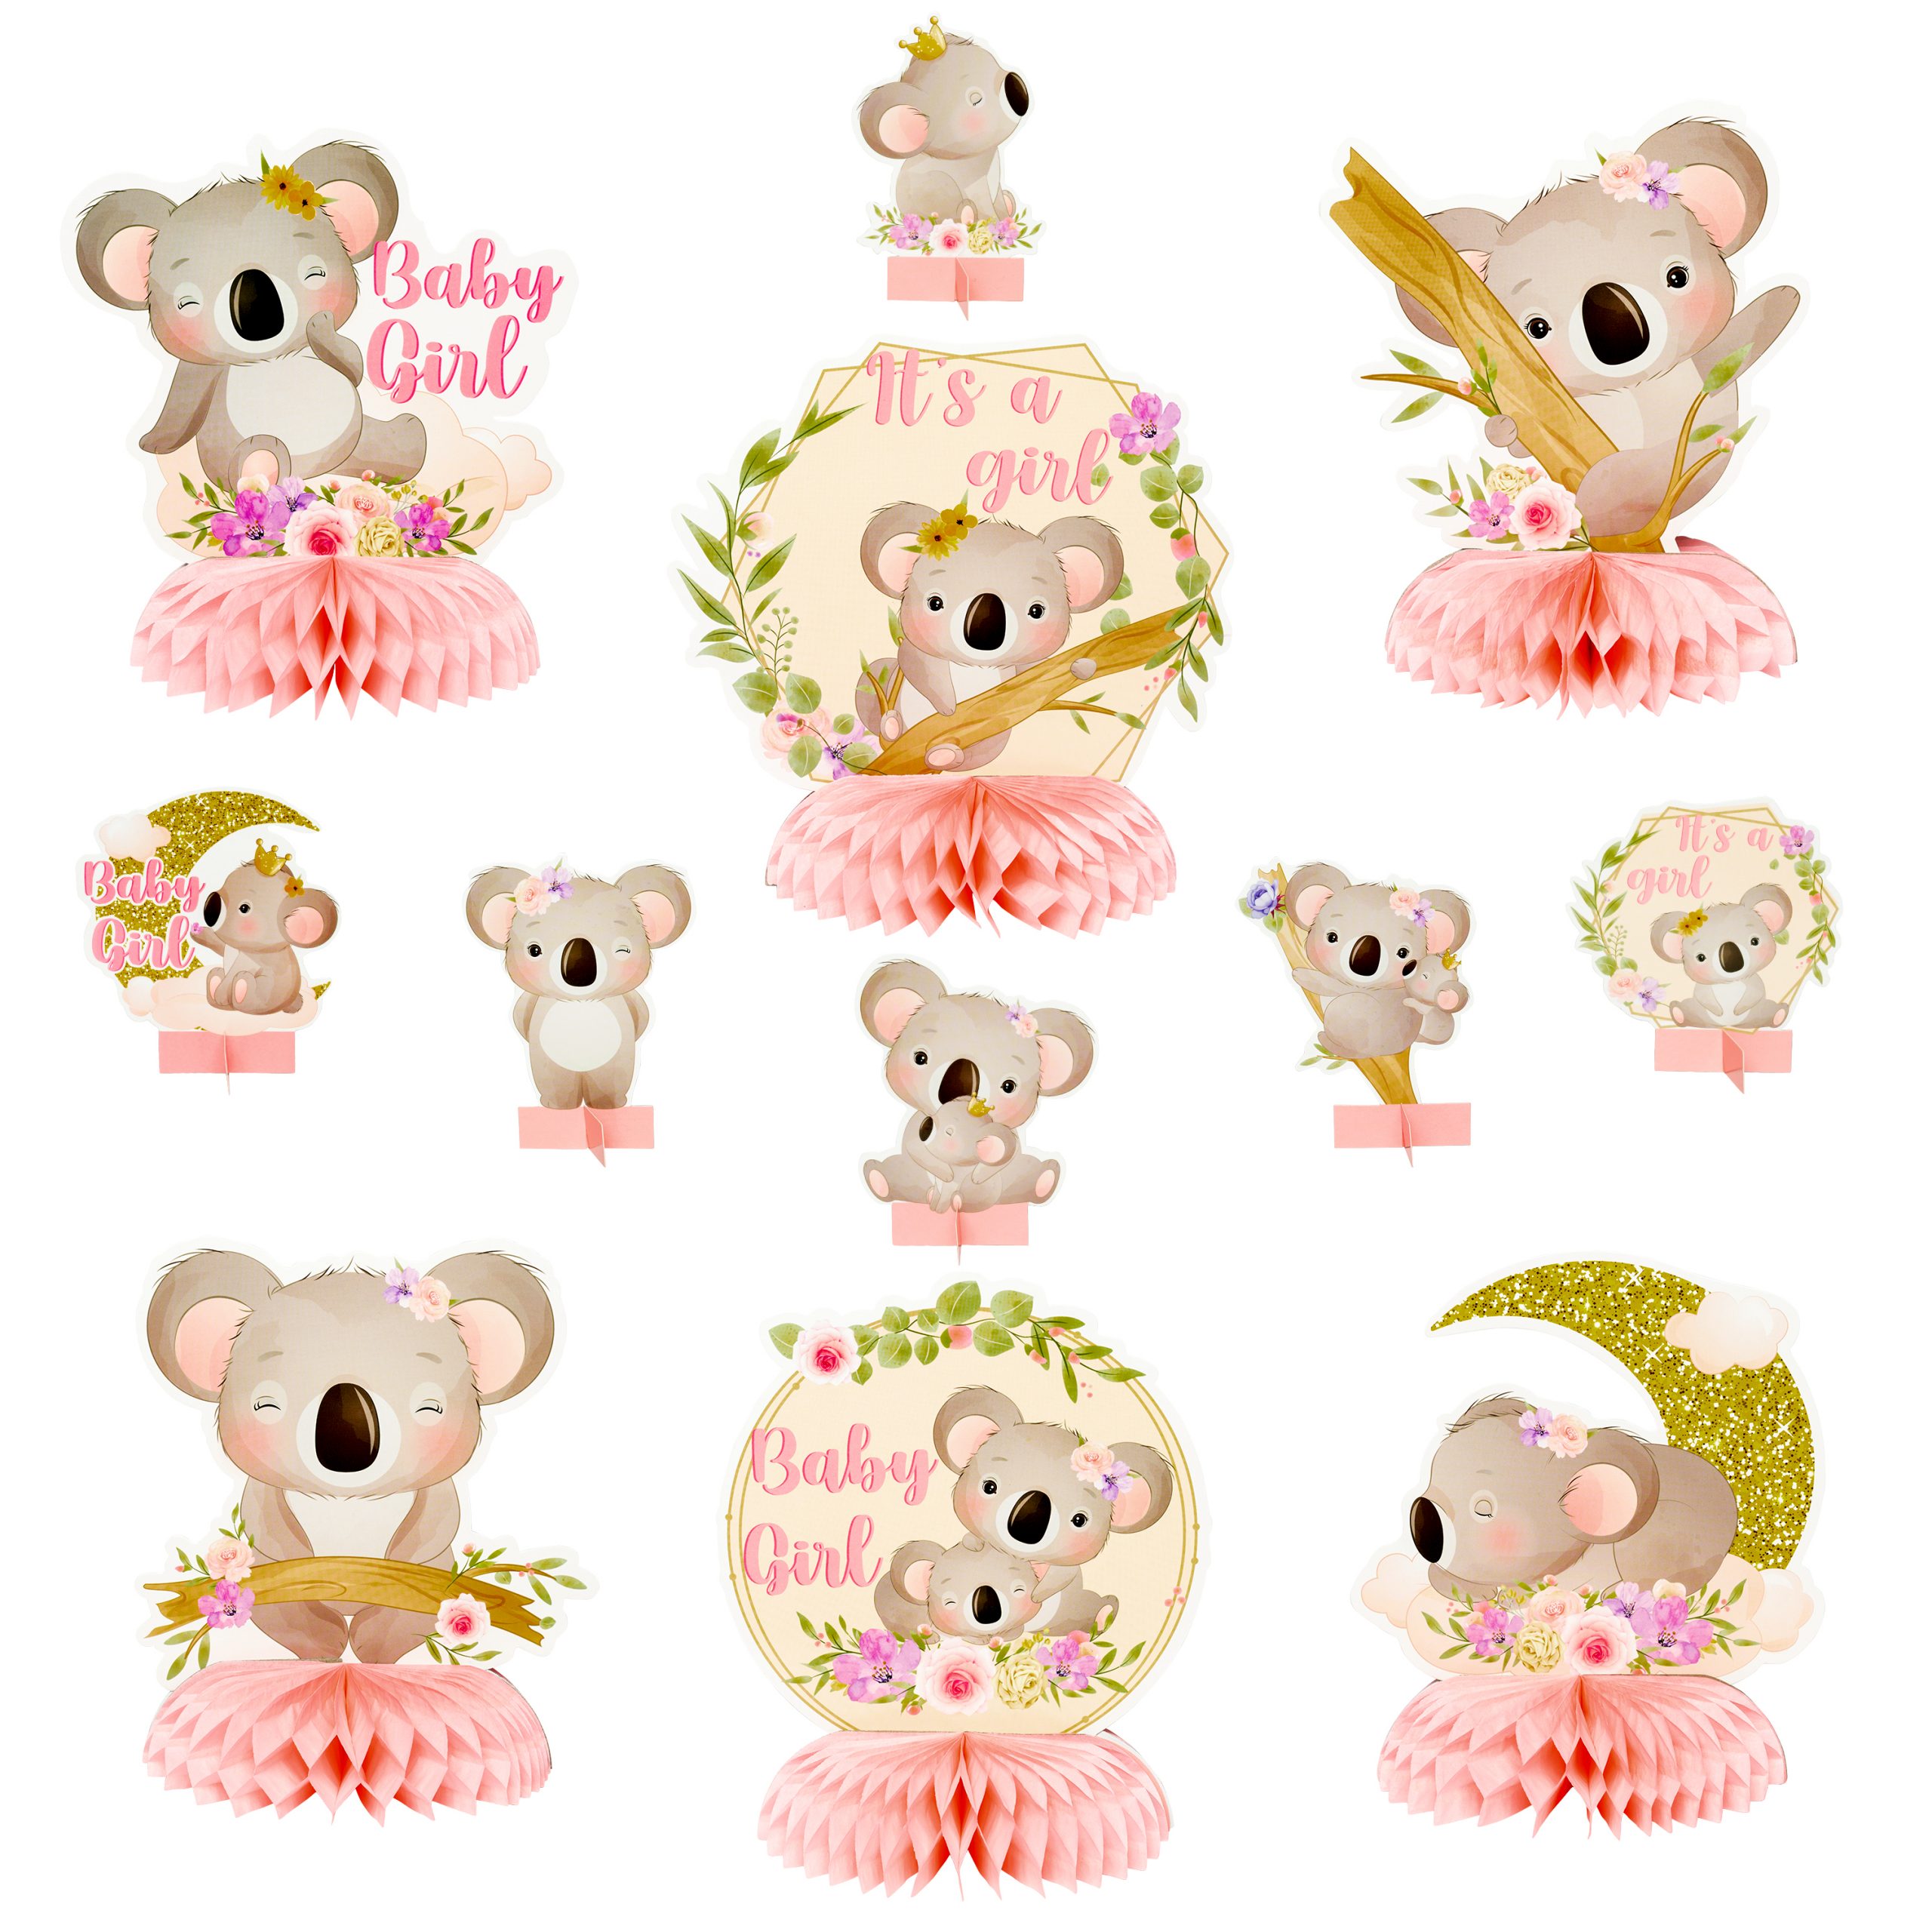 ArowlWesh 12Pcs Girls Baby Shower Party Koala Honeycomb Table Centerpieces  Wild Animal Koala Bear Themed It's A Girl Gender Reveal Party Decoration